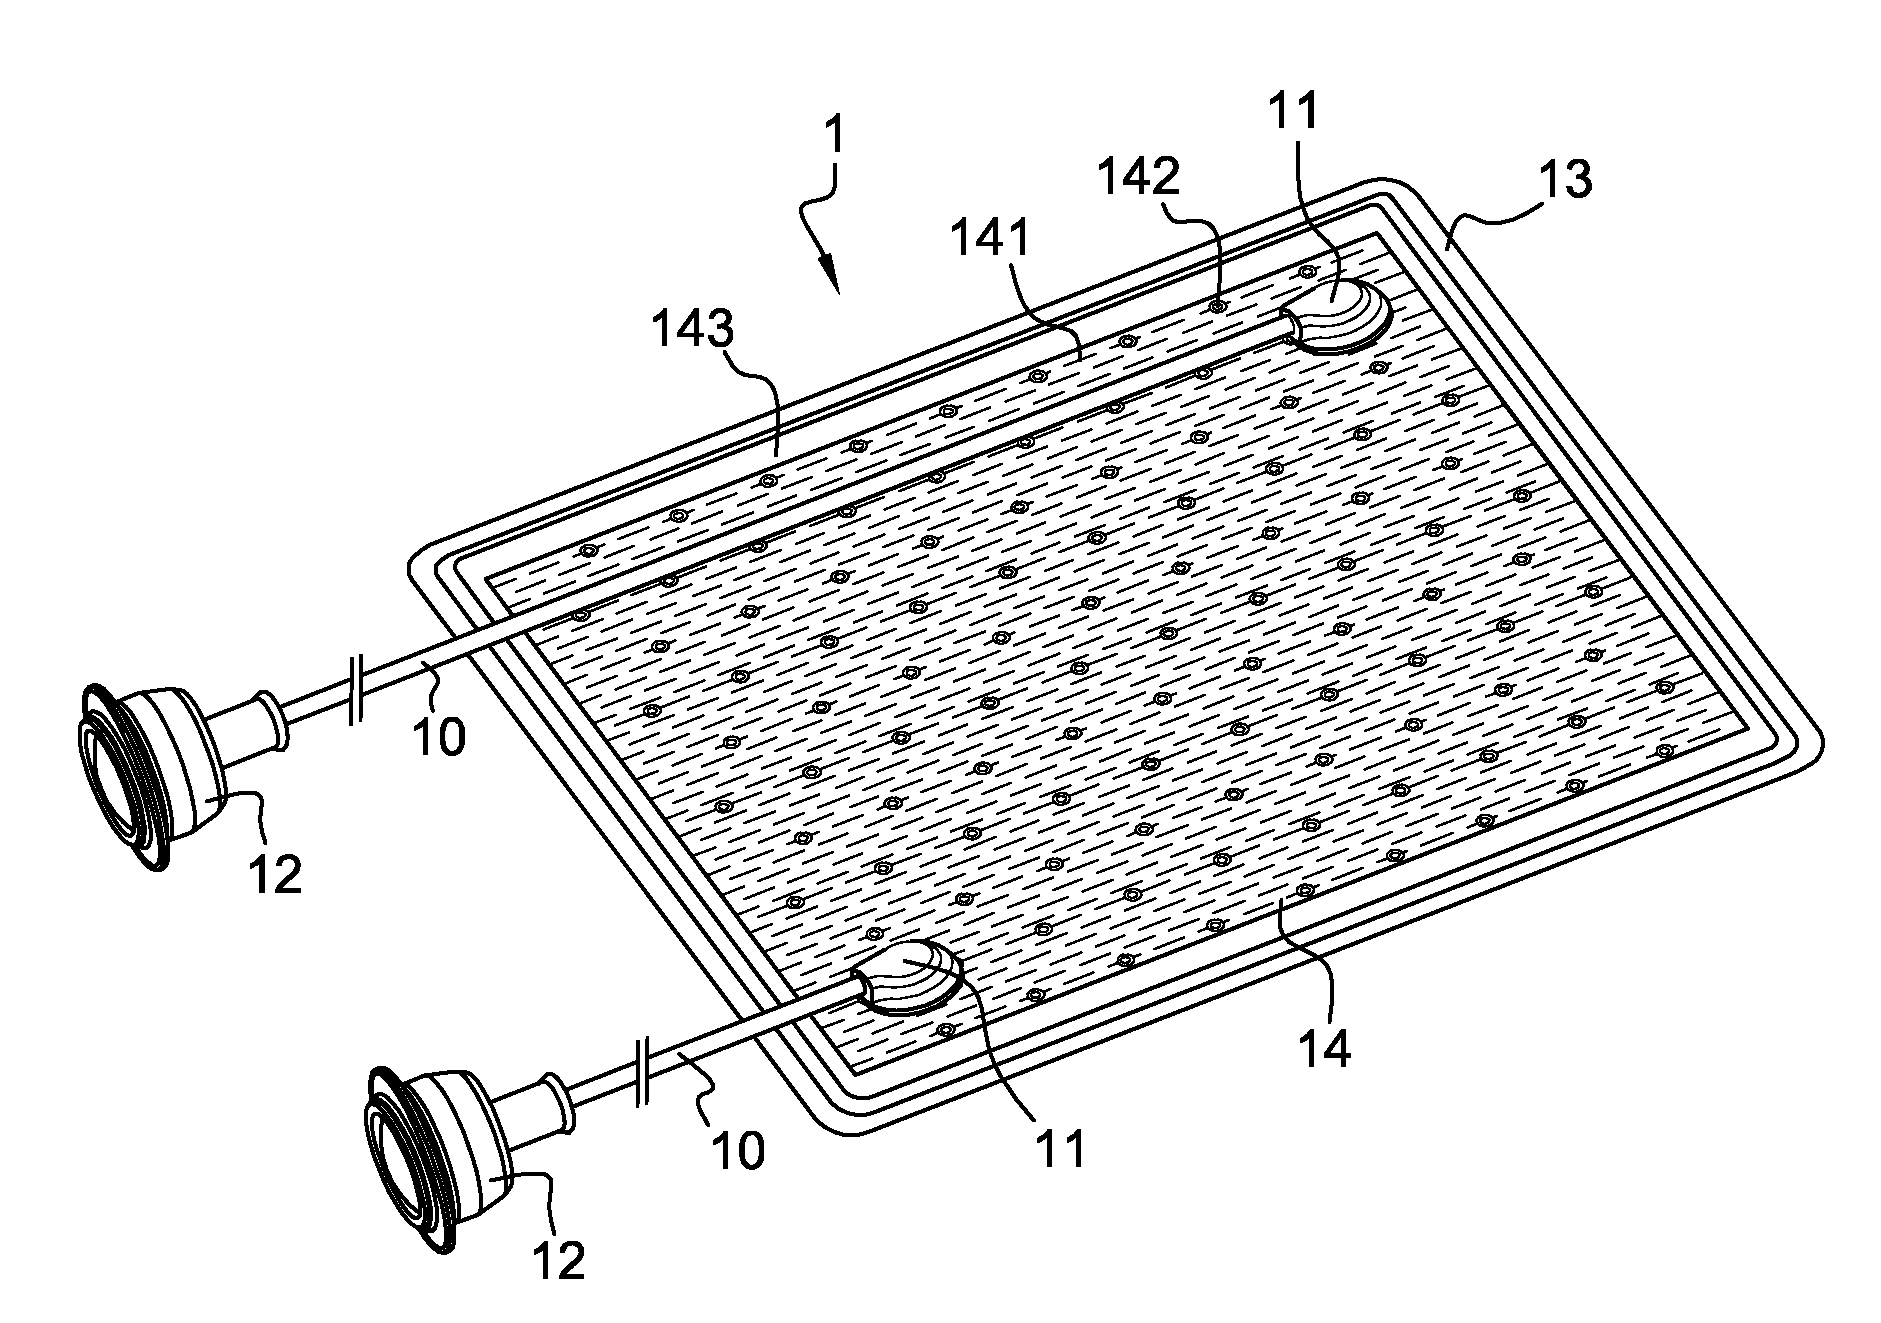 Bag for forming an implantable artificial organ